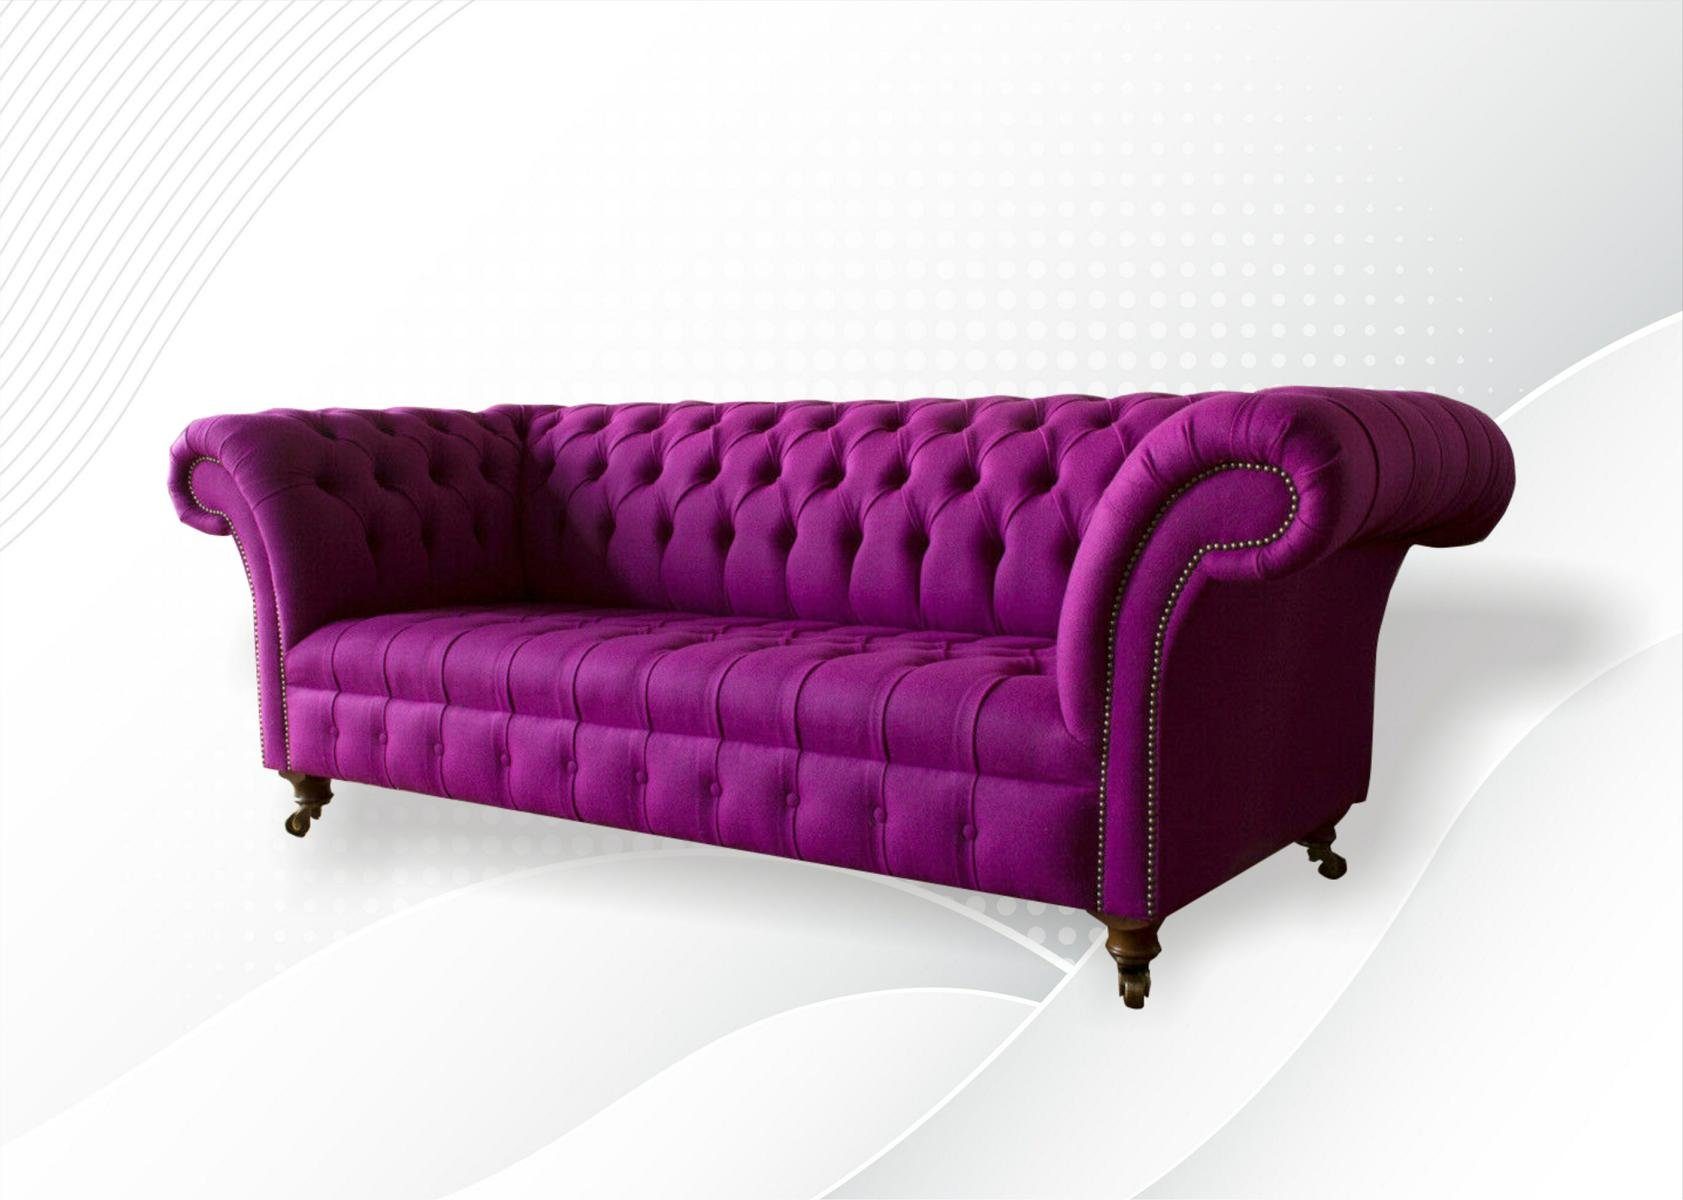 JVmoebel Chesterfield-Sofa Lila Chesterfield Couch Dreisitzer luxus modernes Design, Made in Europe | Chesterfield-Sofas